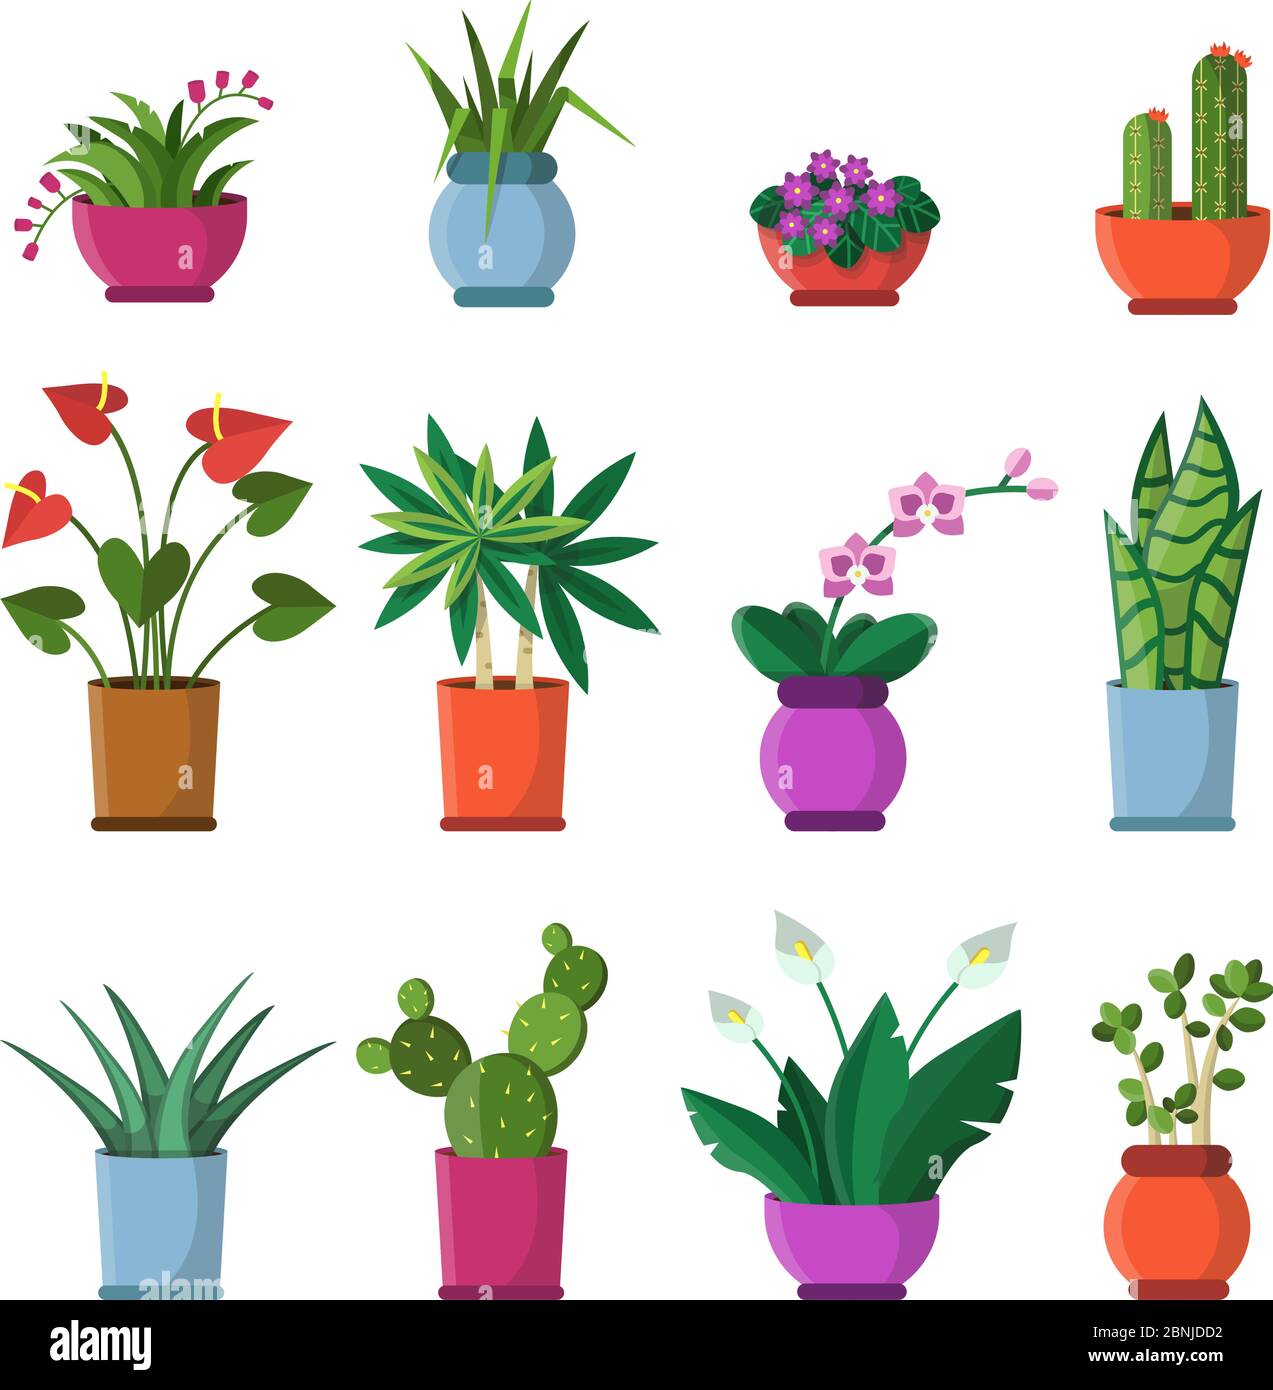 Vector illustrations of house plants in pots Stock Vector